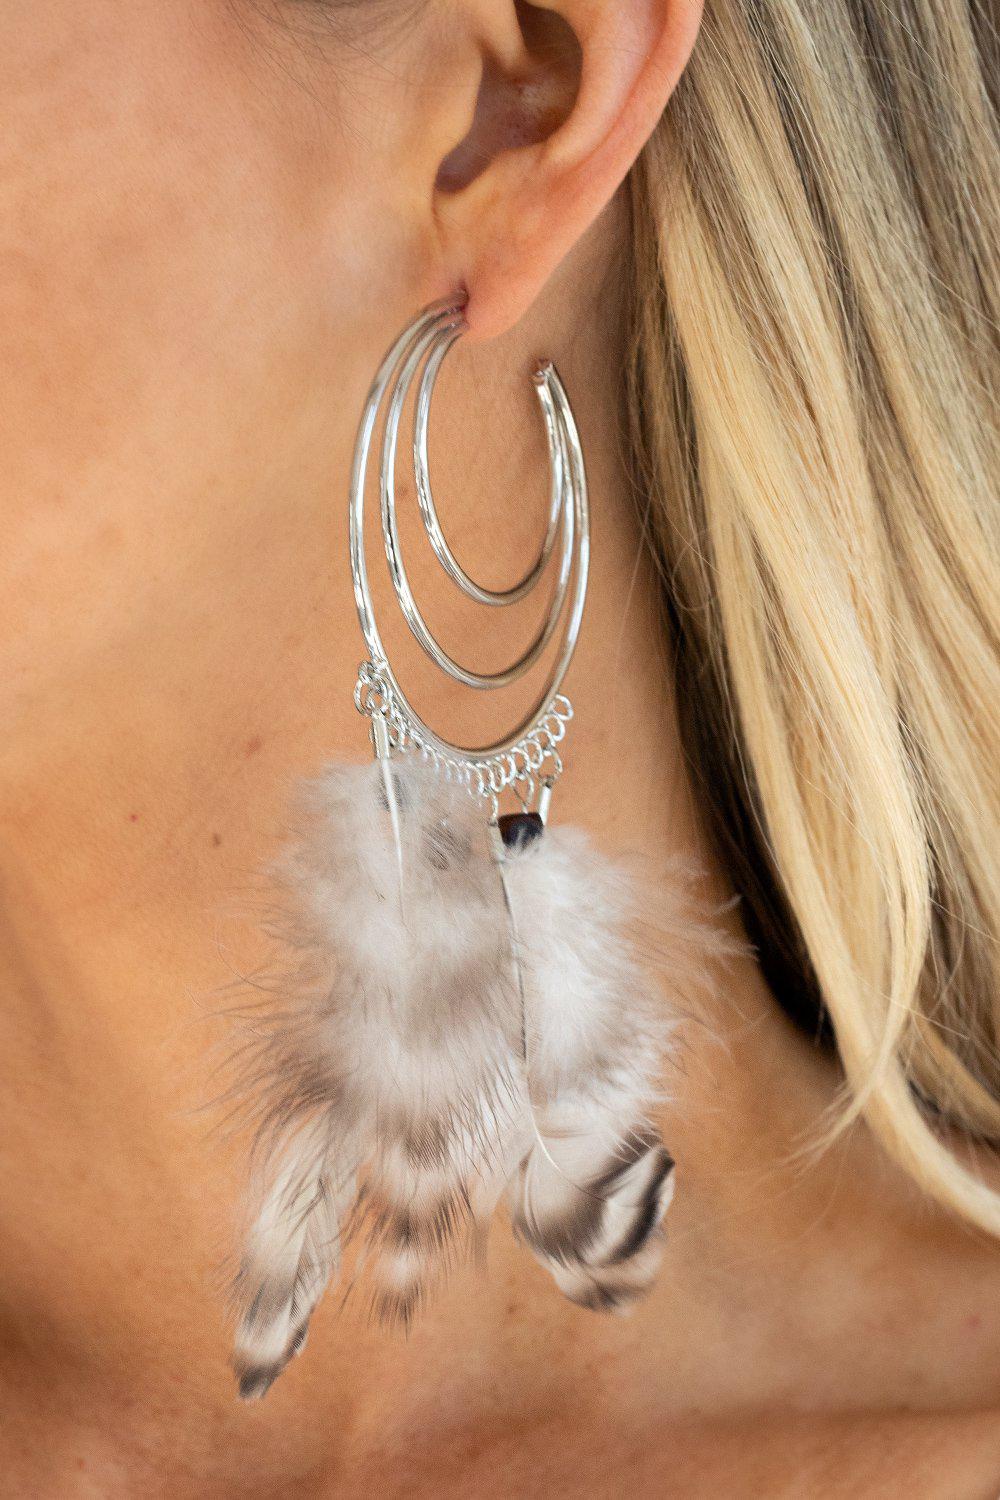 Freely Free Bird Brown Feather and Silver Hoop Earrings - Paparazzi Accessories - model -CarasShop.com - $5 Jewelry by Cara Jewels